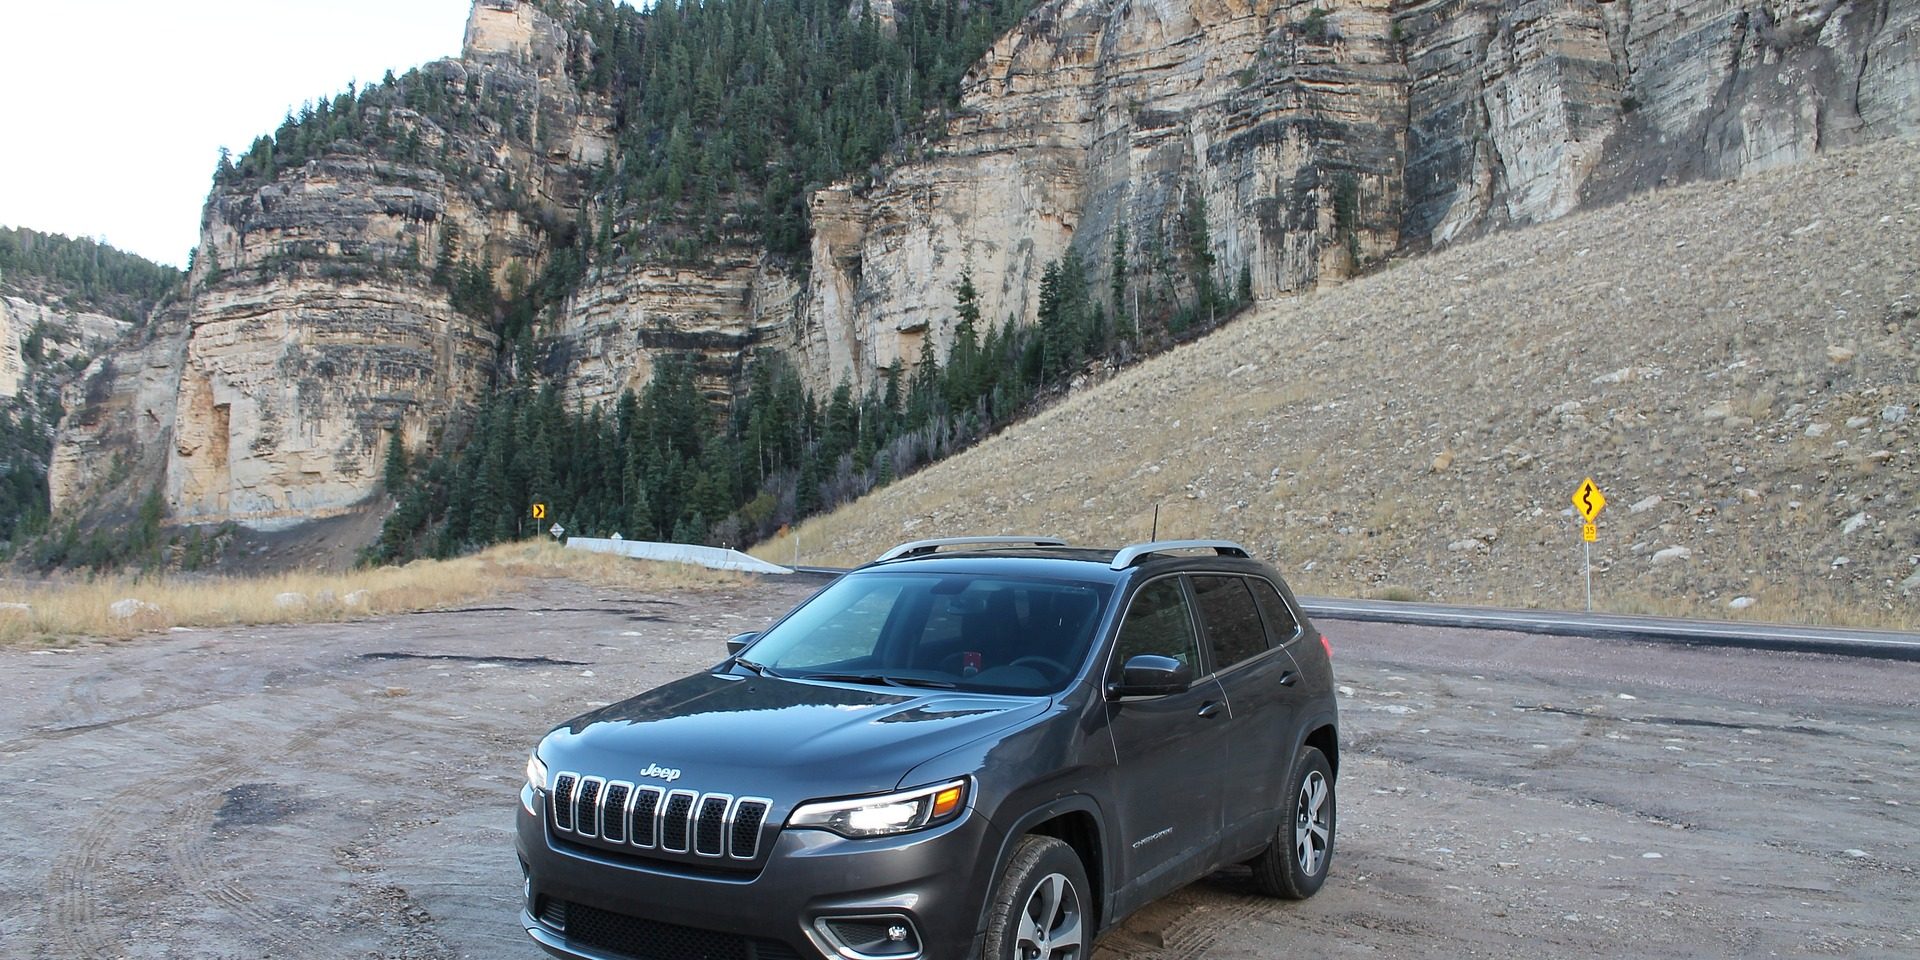 Best SUVs for Long-Distance Travel